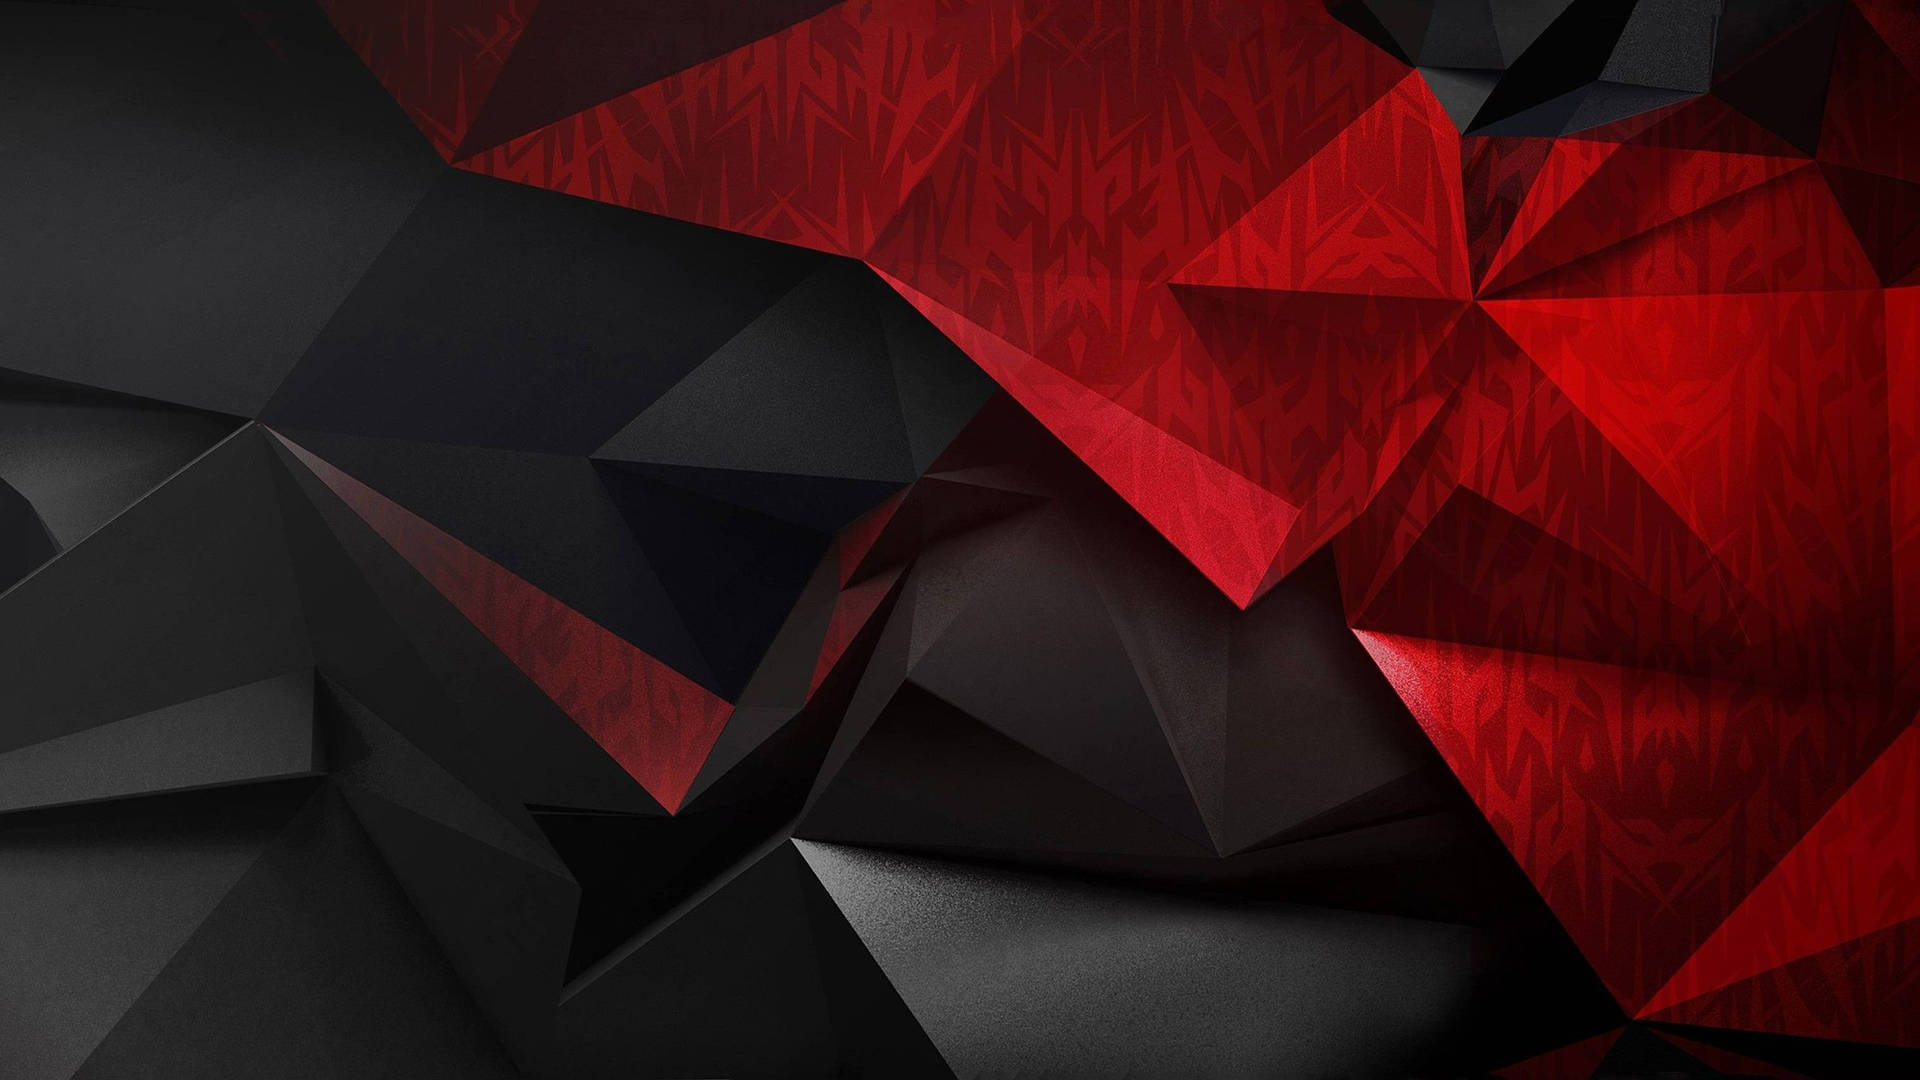 Black And Red Acer Predator Geometric Background